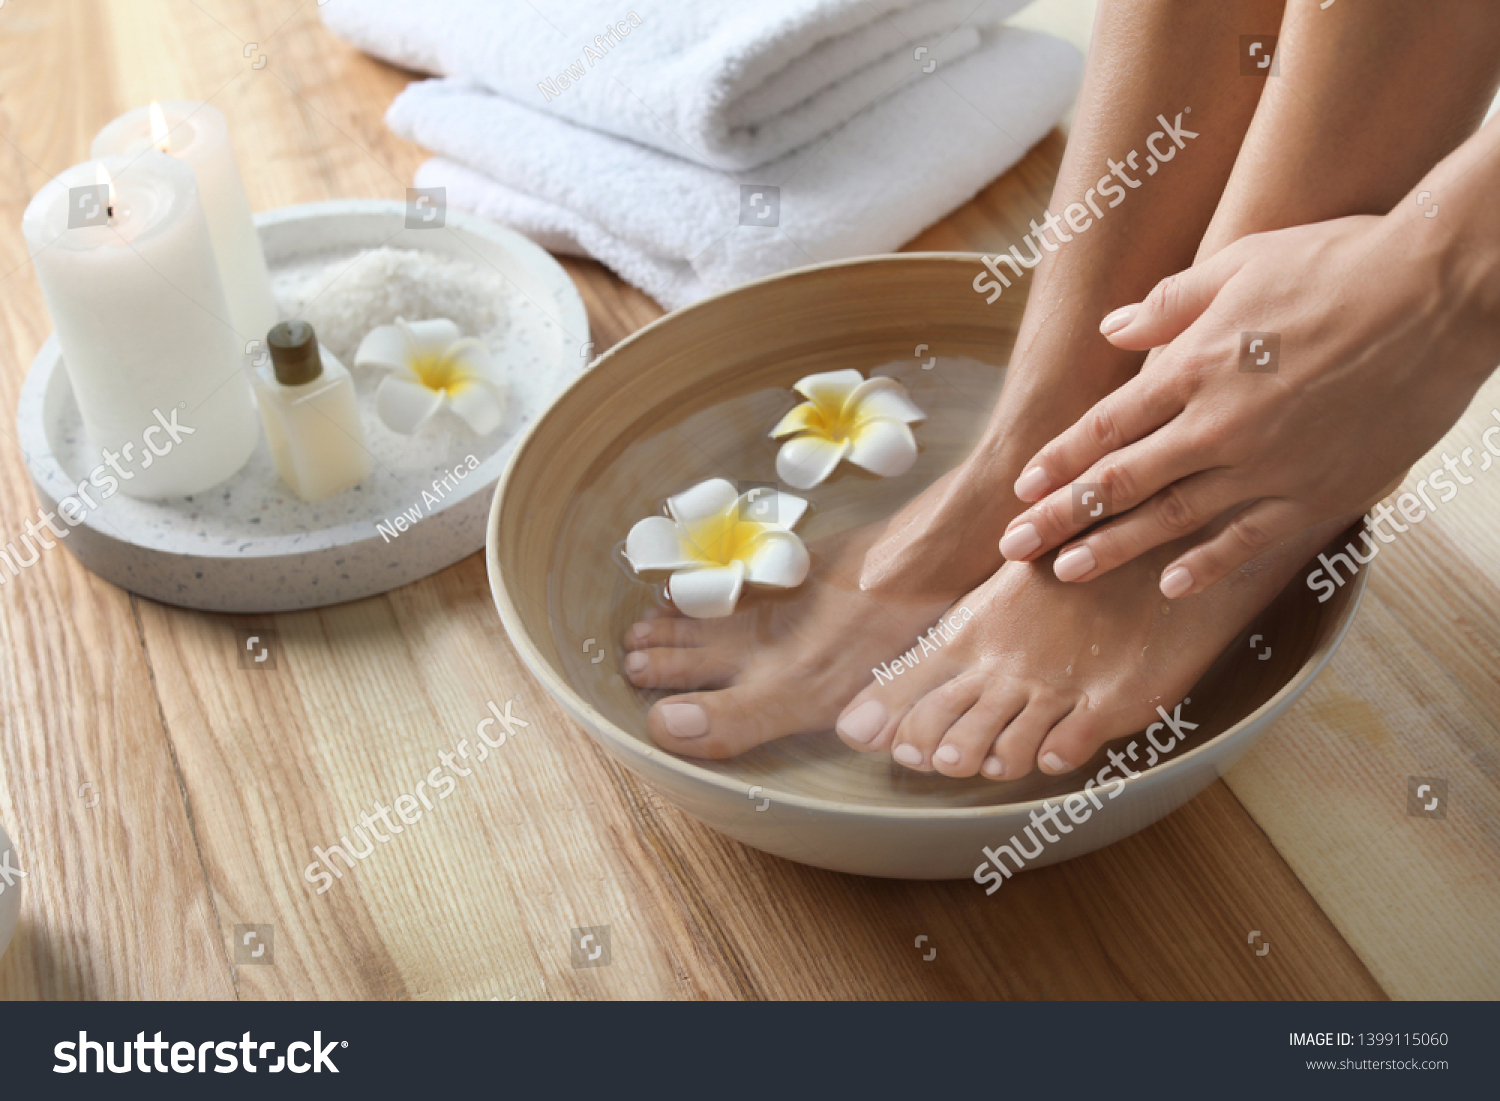 Closeup view of woman soaking her feet in dish with water and flowers on wooden floor. Spa treatment #1399115060